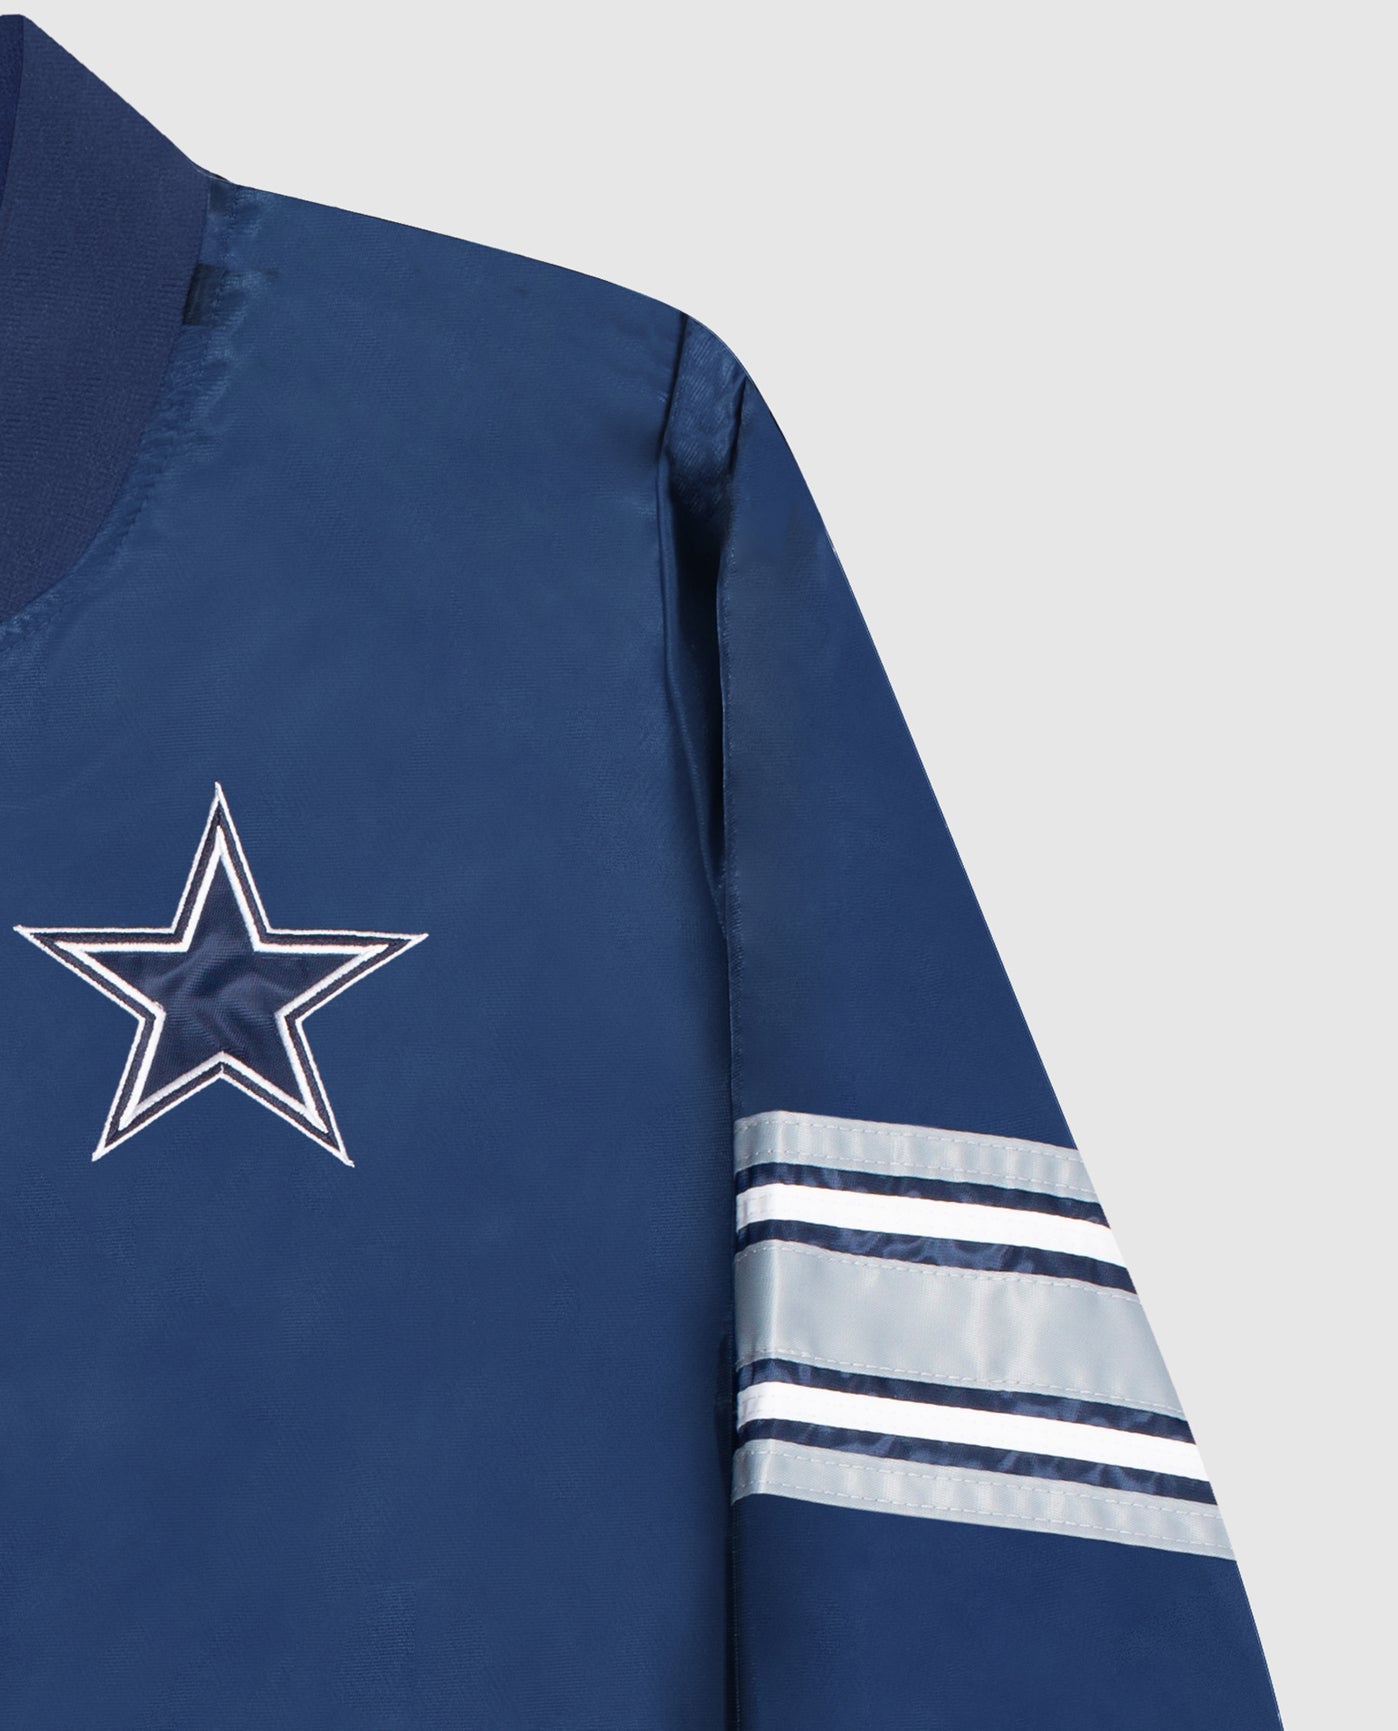 Team Logo On Chest and Striped Sleeve Of Women's Dallas Cowboys Snap-Front Satin Jacket | Cowboys Navy